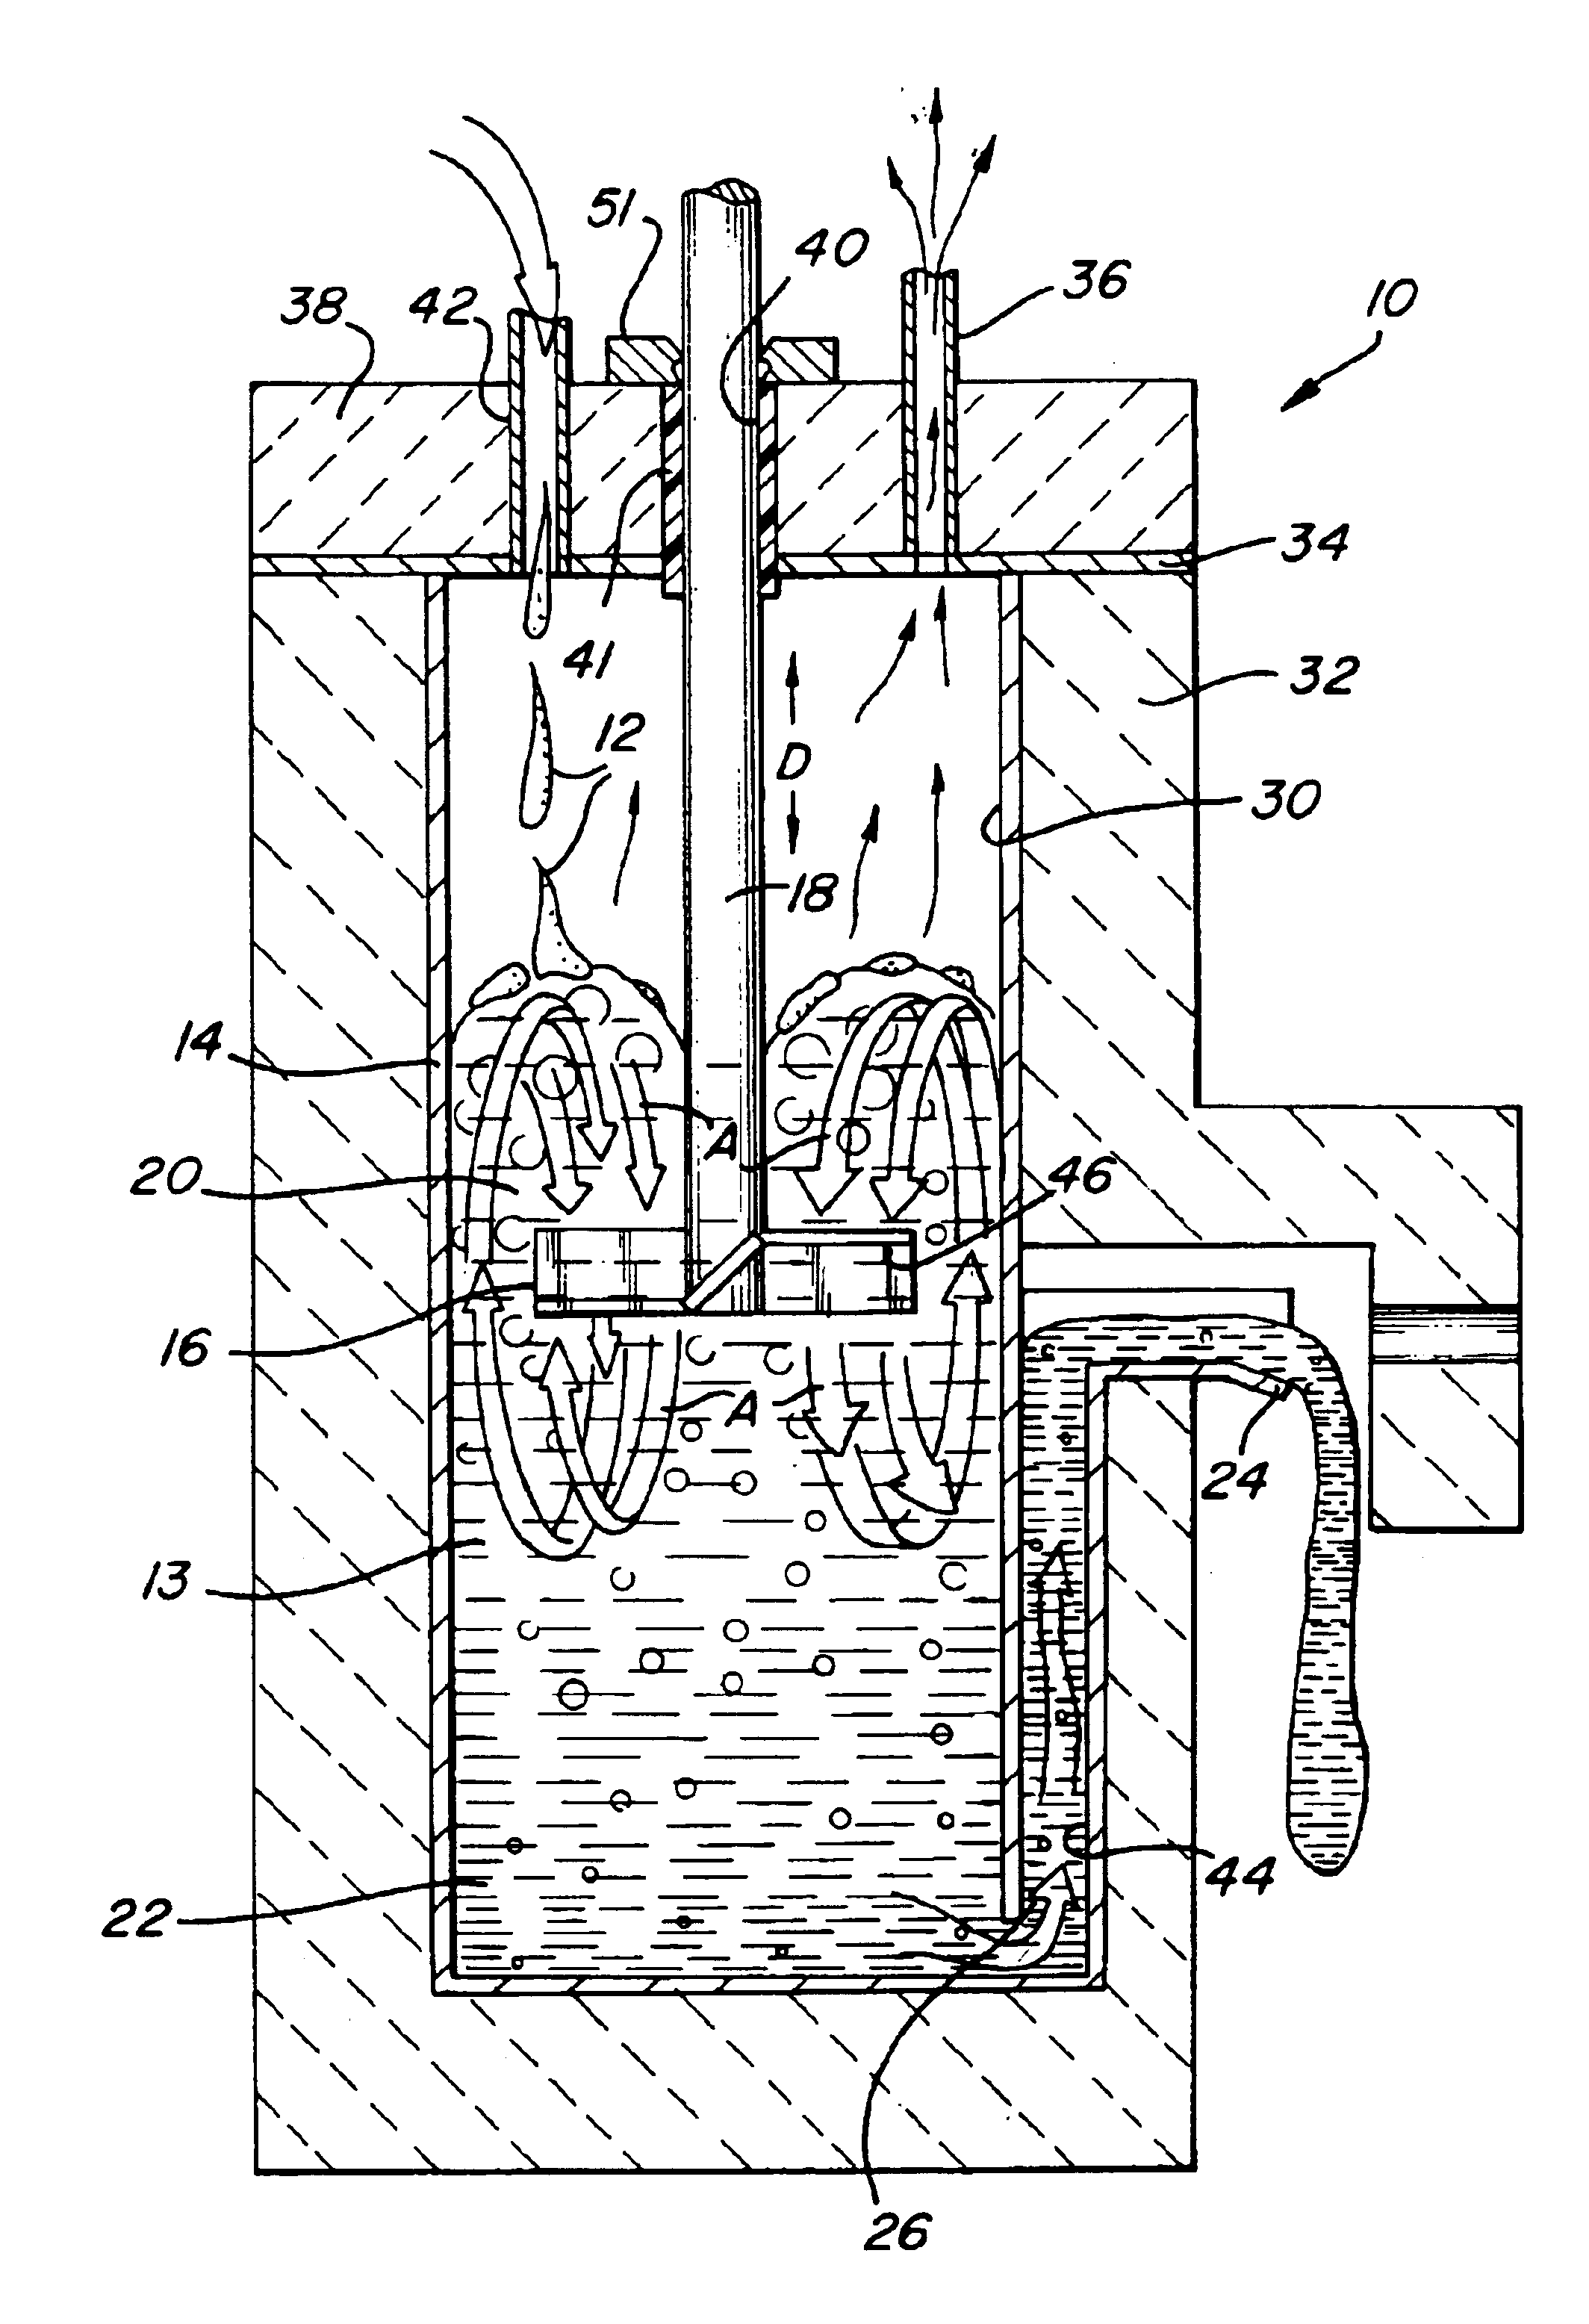 Method and apparatus for waste vitrification